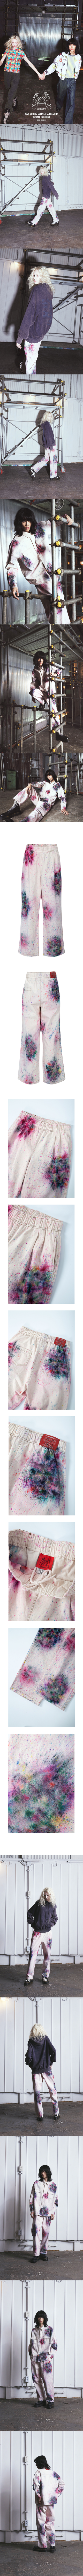 Hand Spray Dyed Cotton Pants